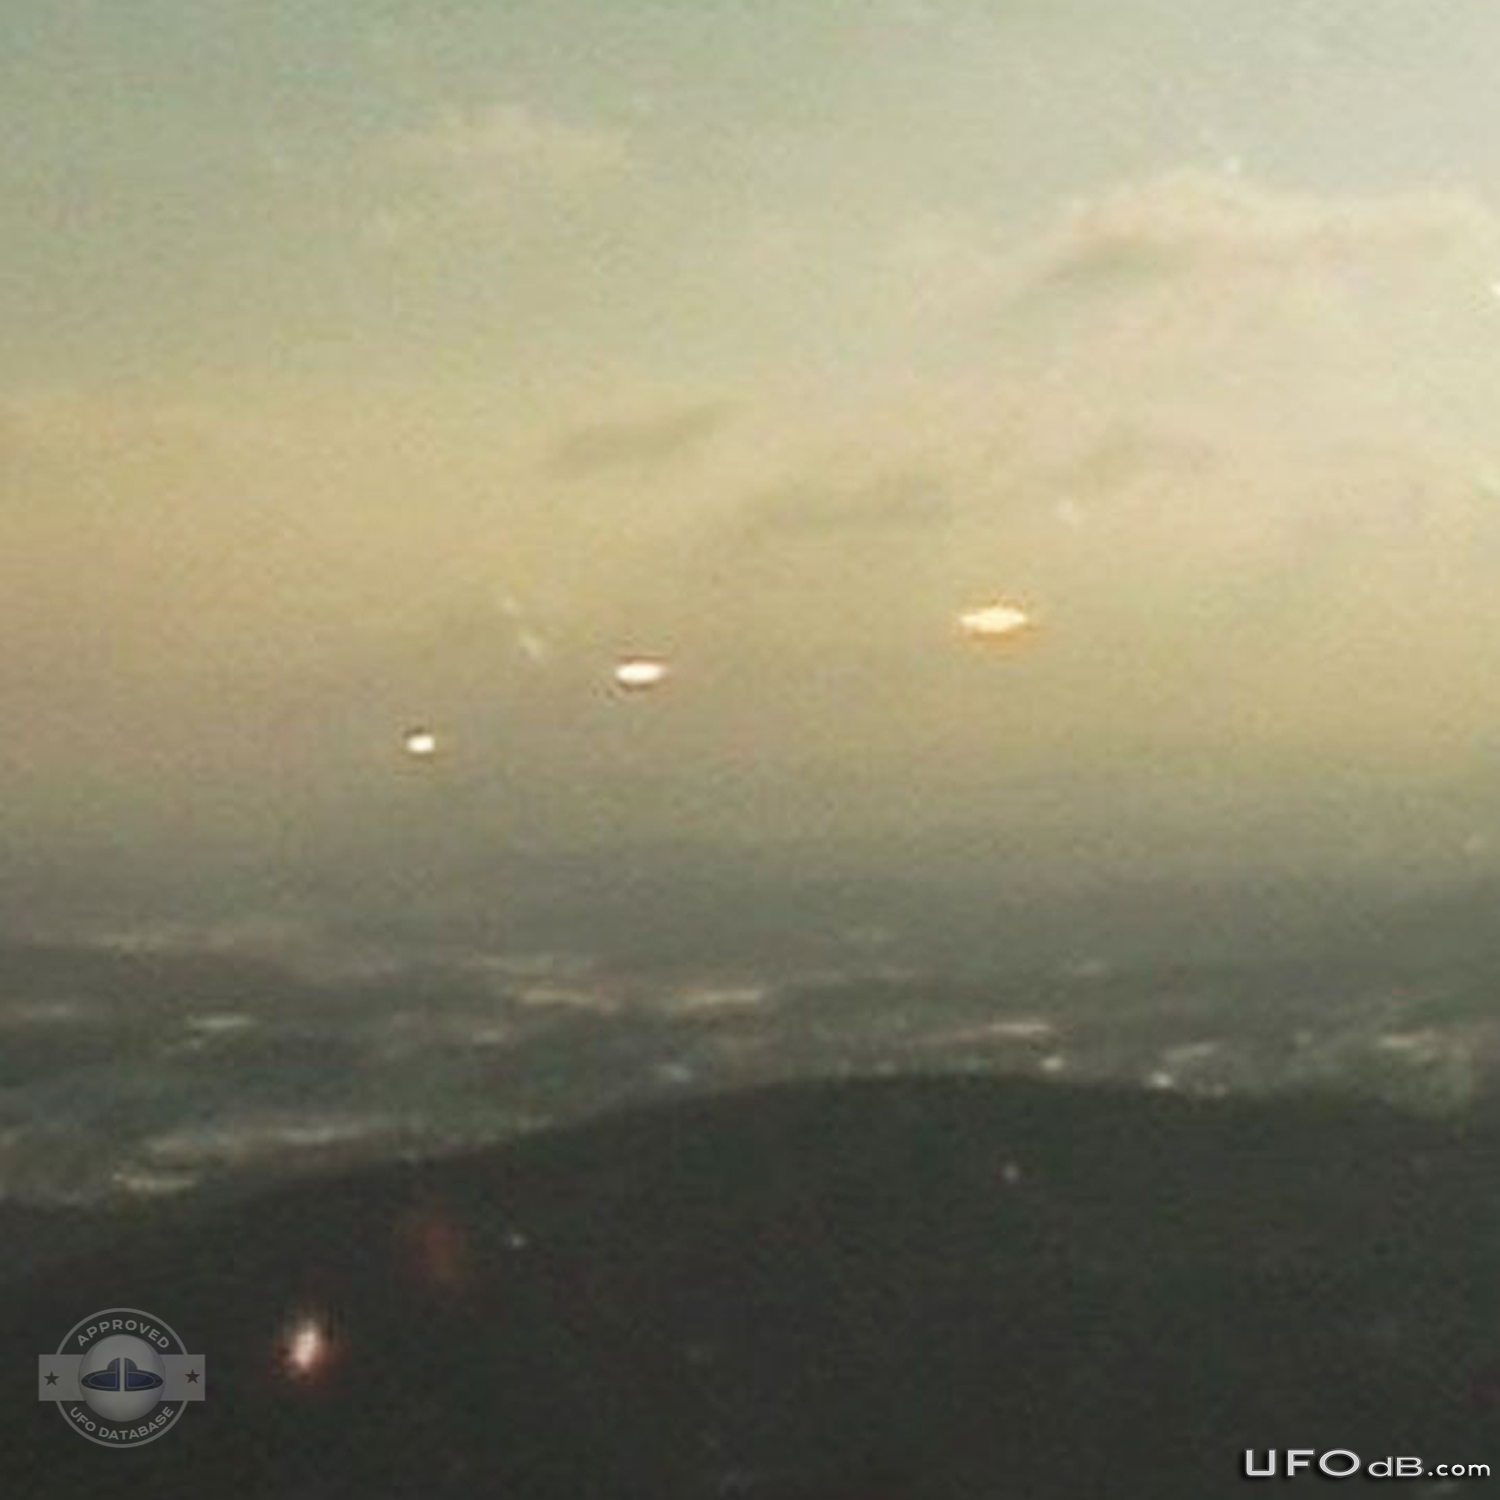 Sunrise reveals a fleet of cloaked UFOs in Chiba, Japan | January 2011 UFO Picture #244-3